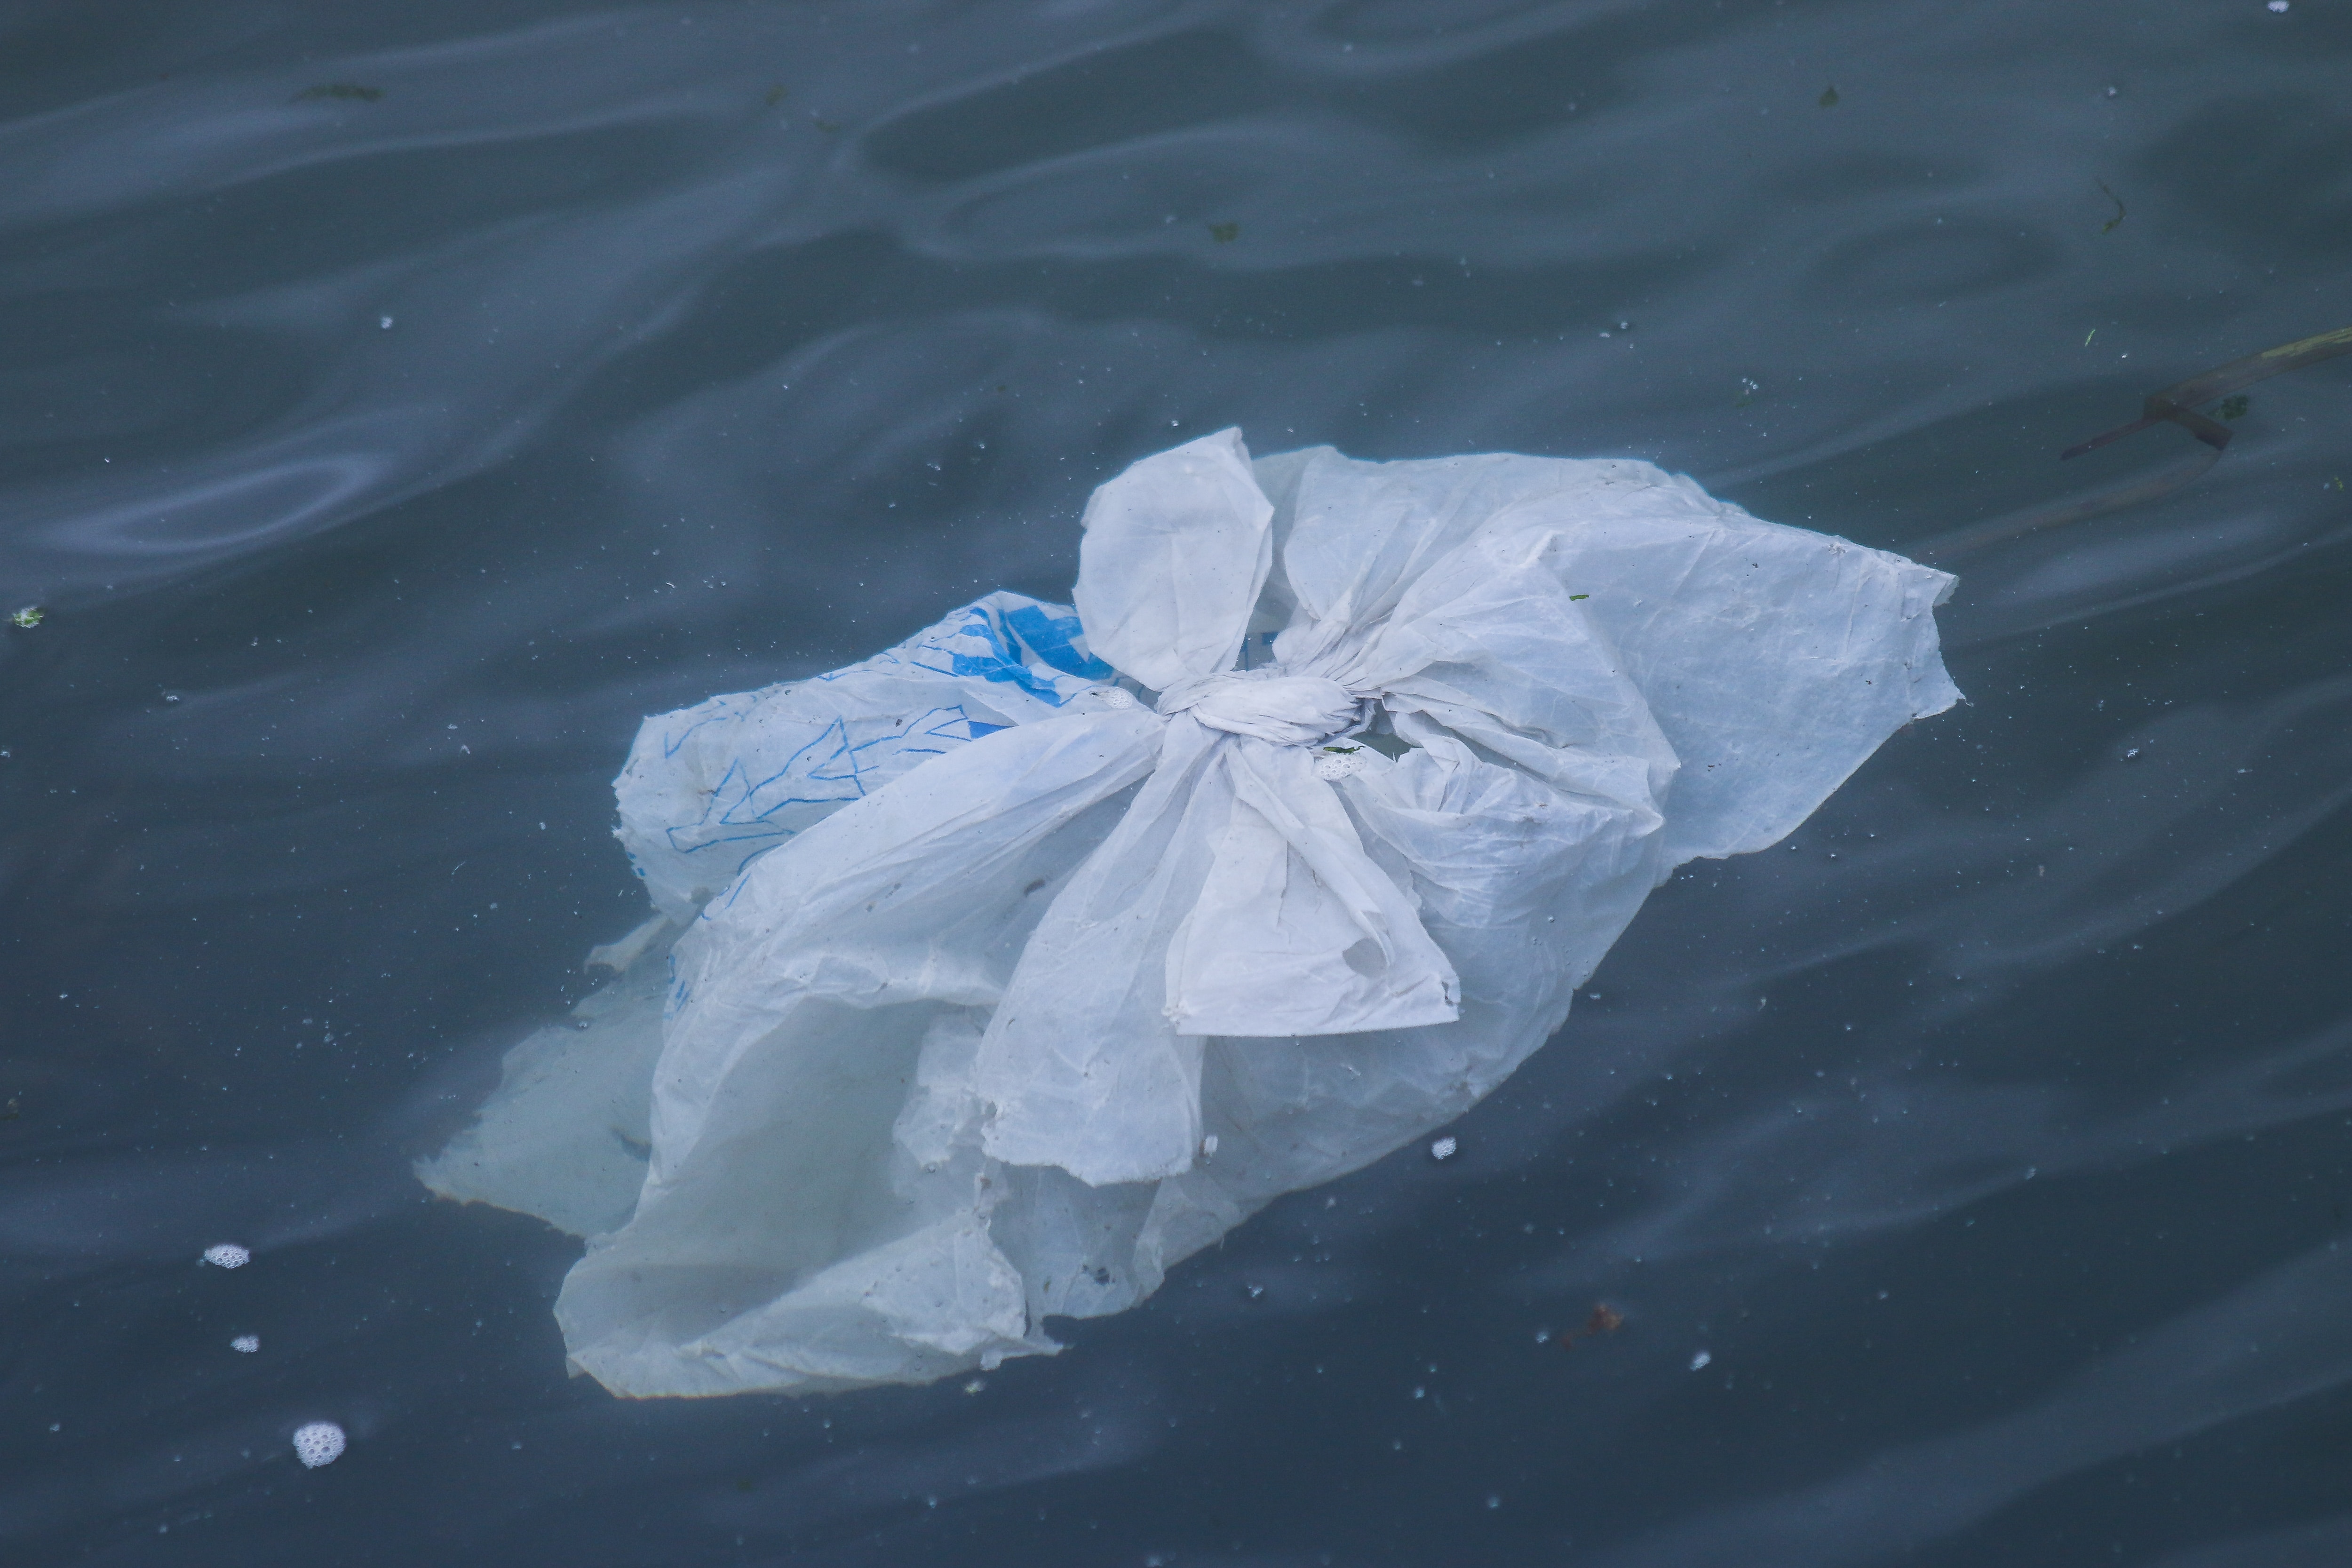 Plastic Bag Bans: The Trend That Can't Stop, Won't Stop